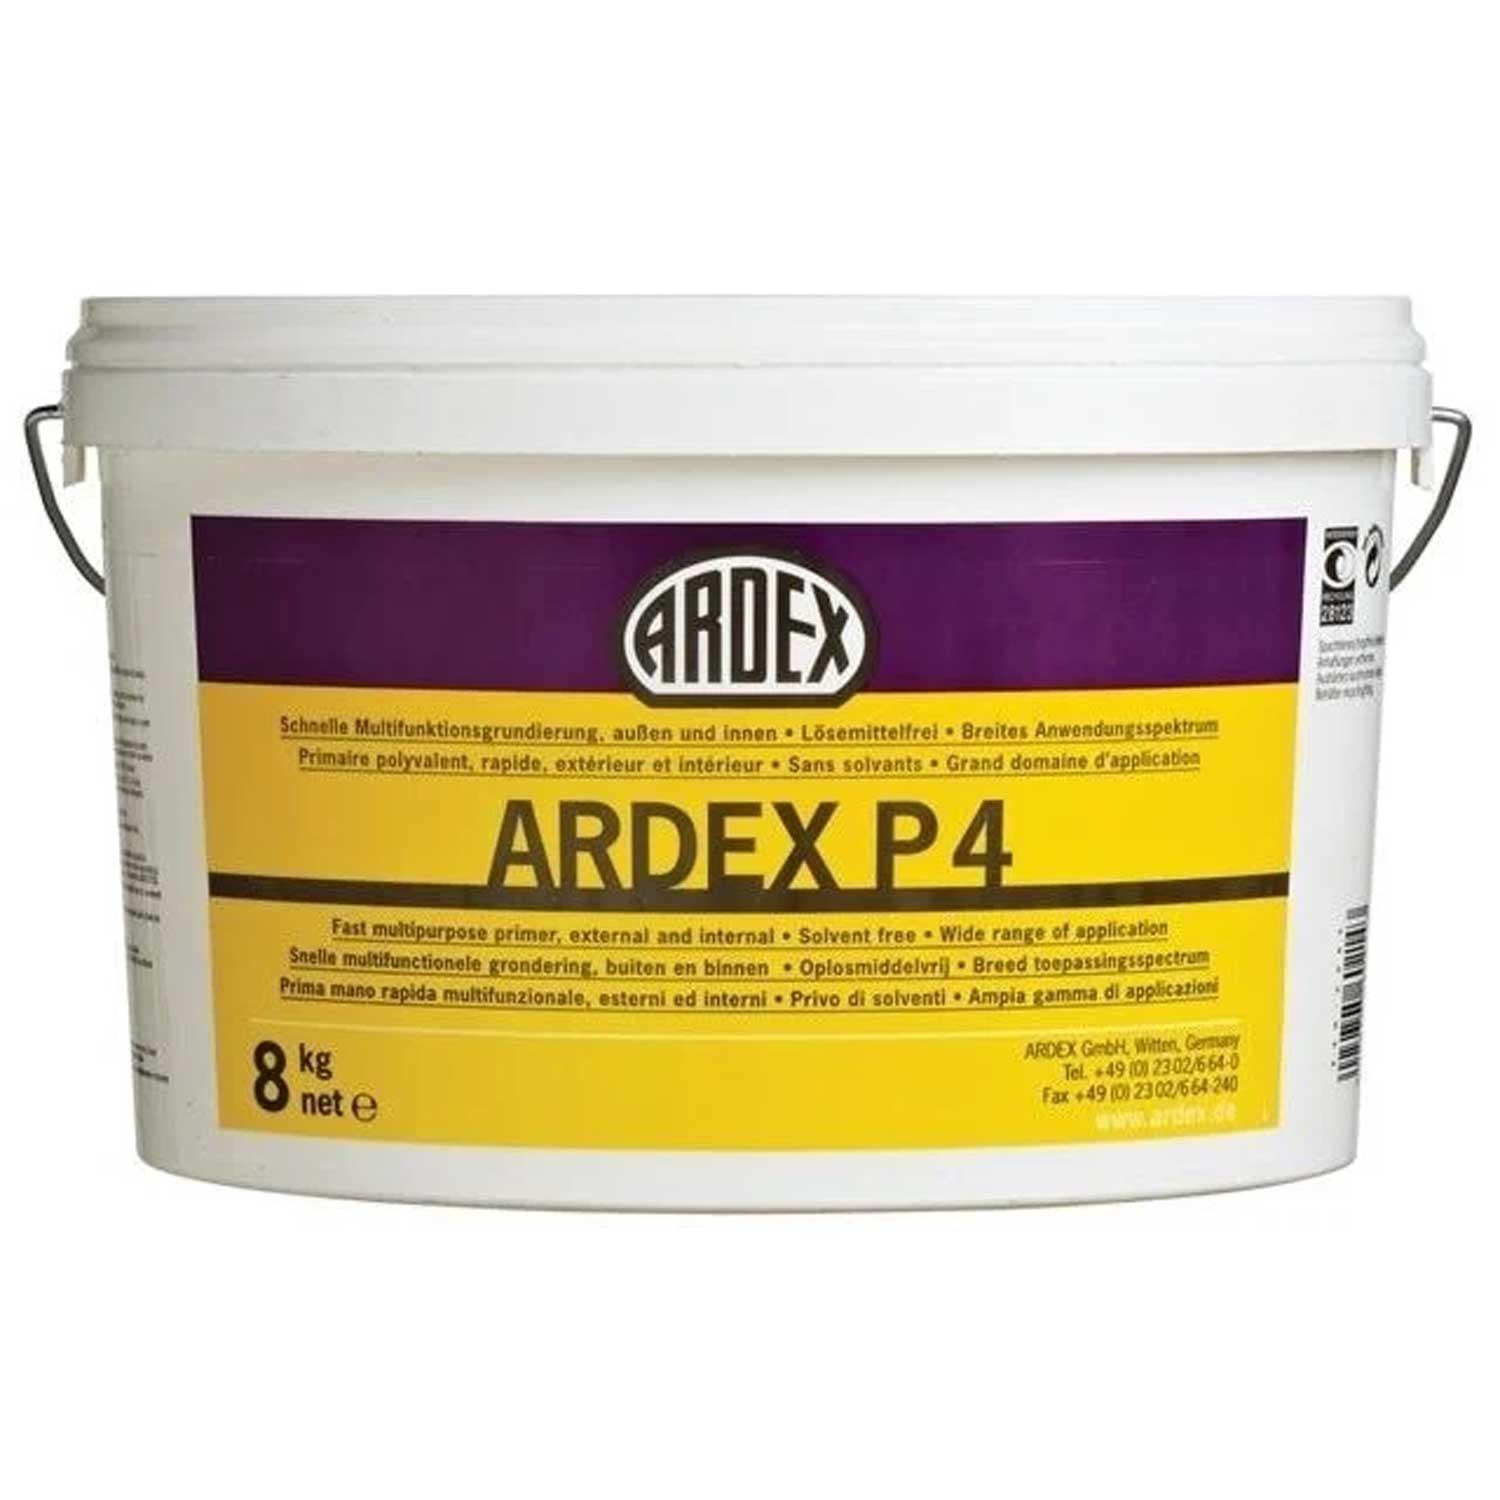 Ardex P 4 Primer 8kg Ready Mixed Rapid Drying Primer